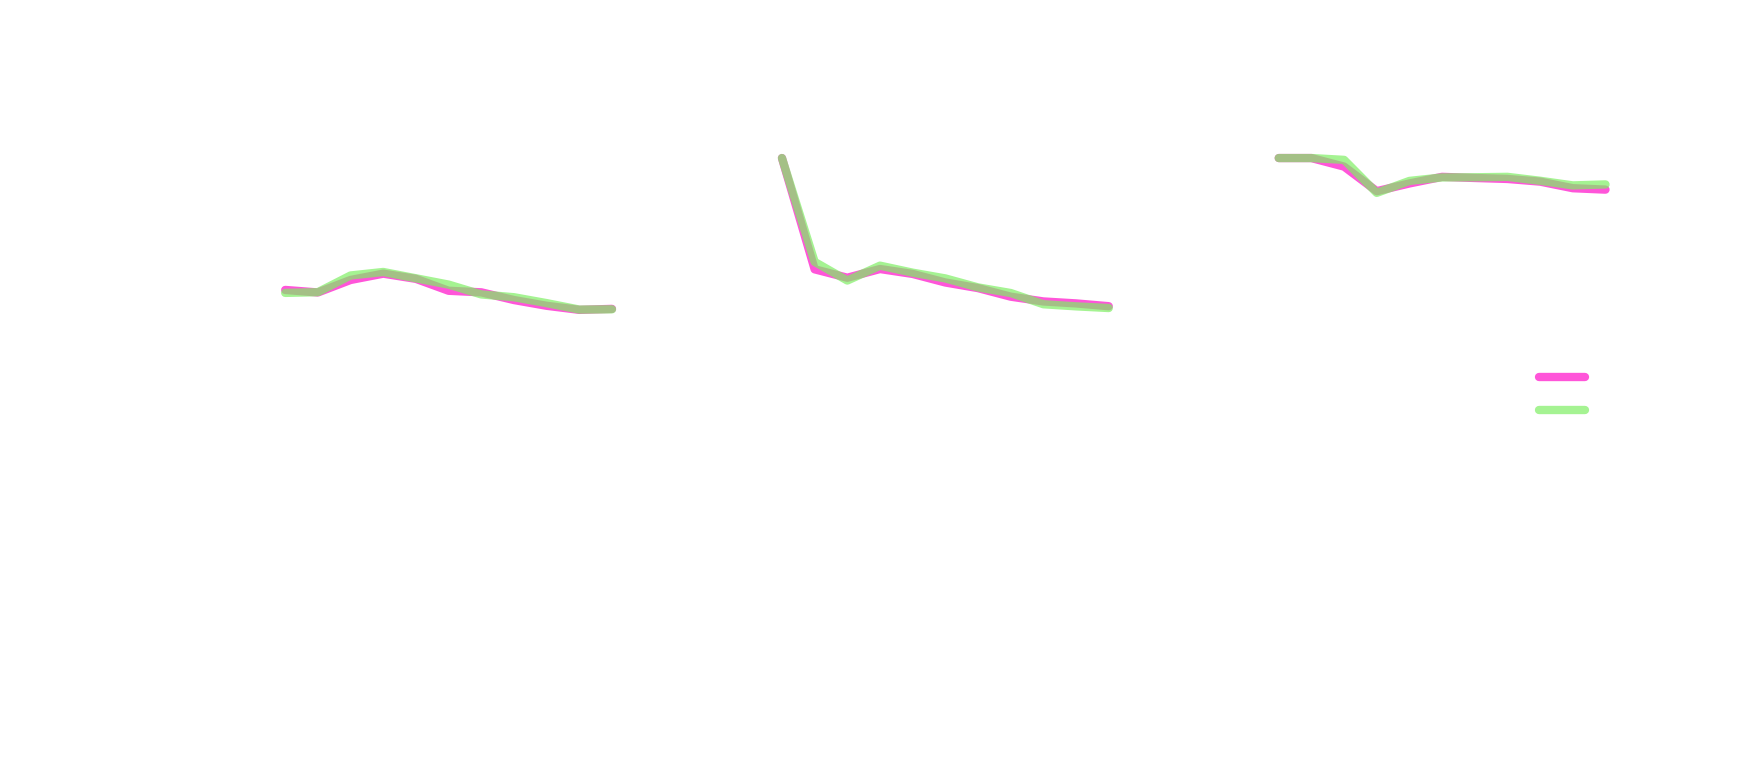 Error rate as a function of dataset size